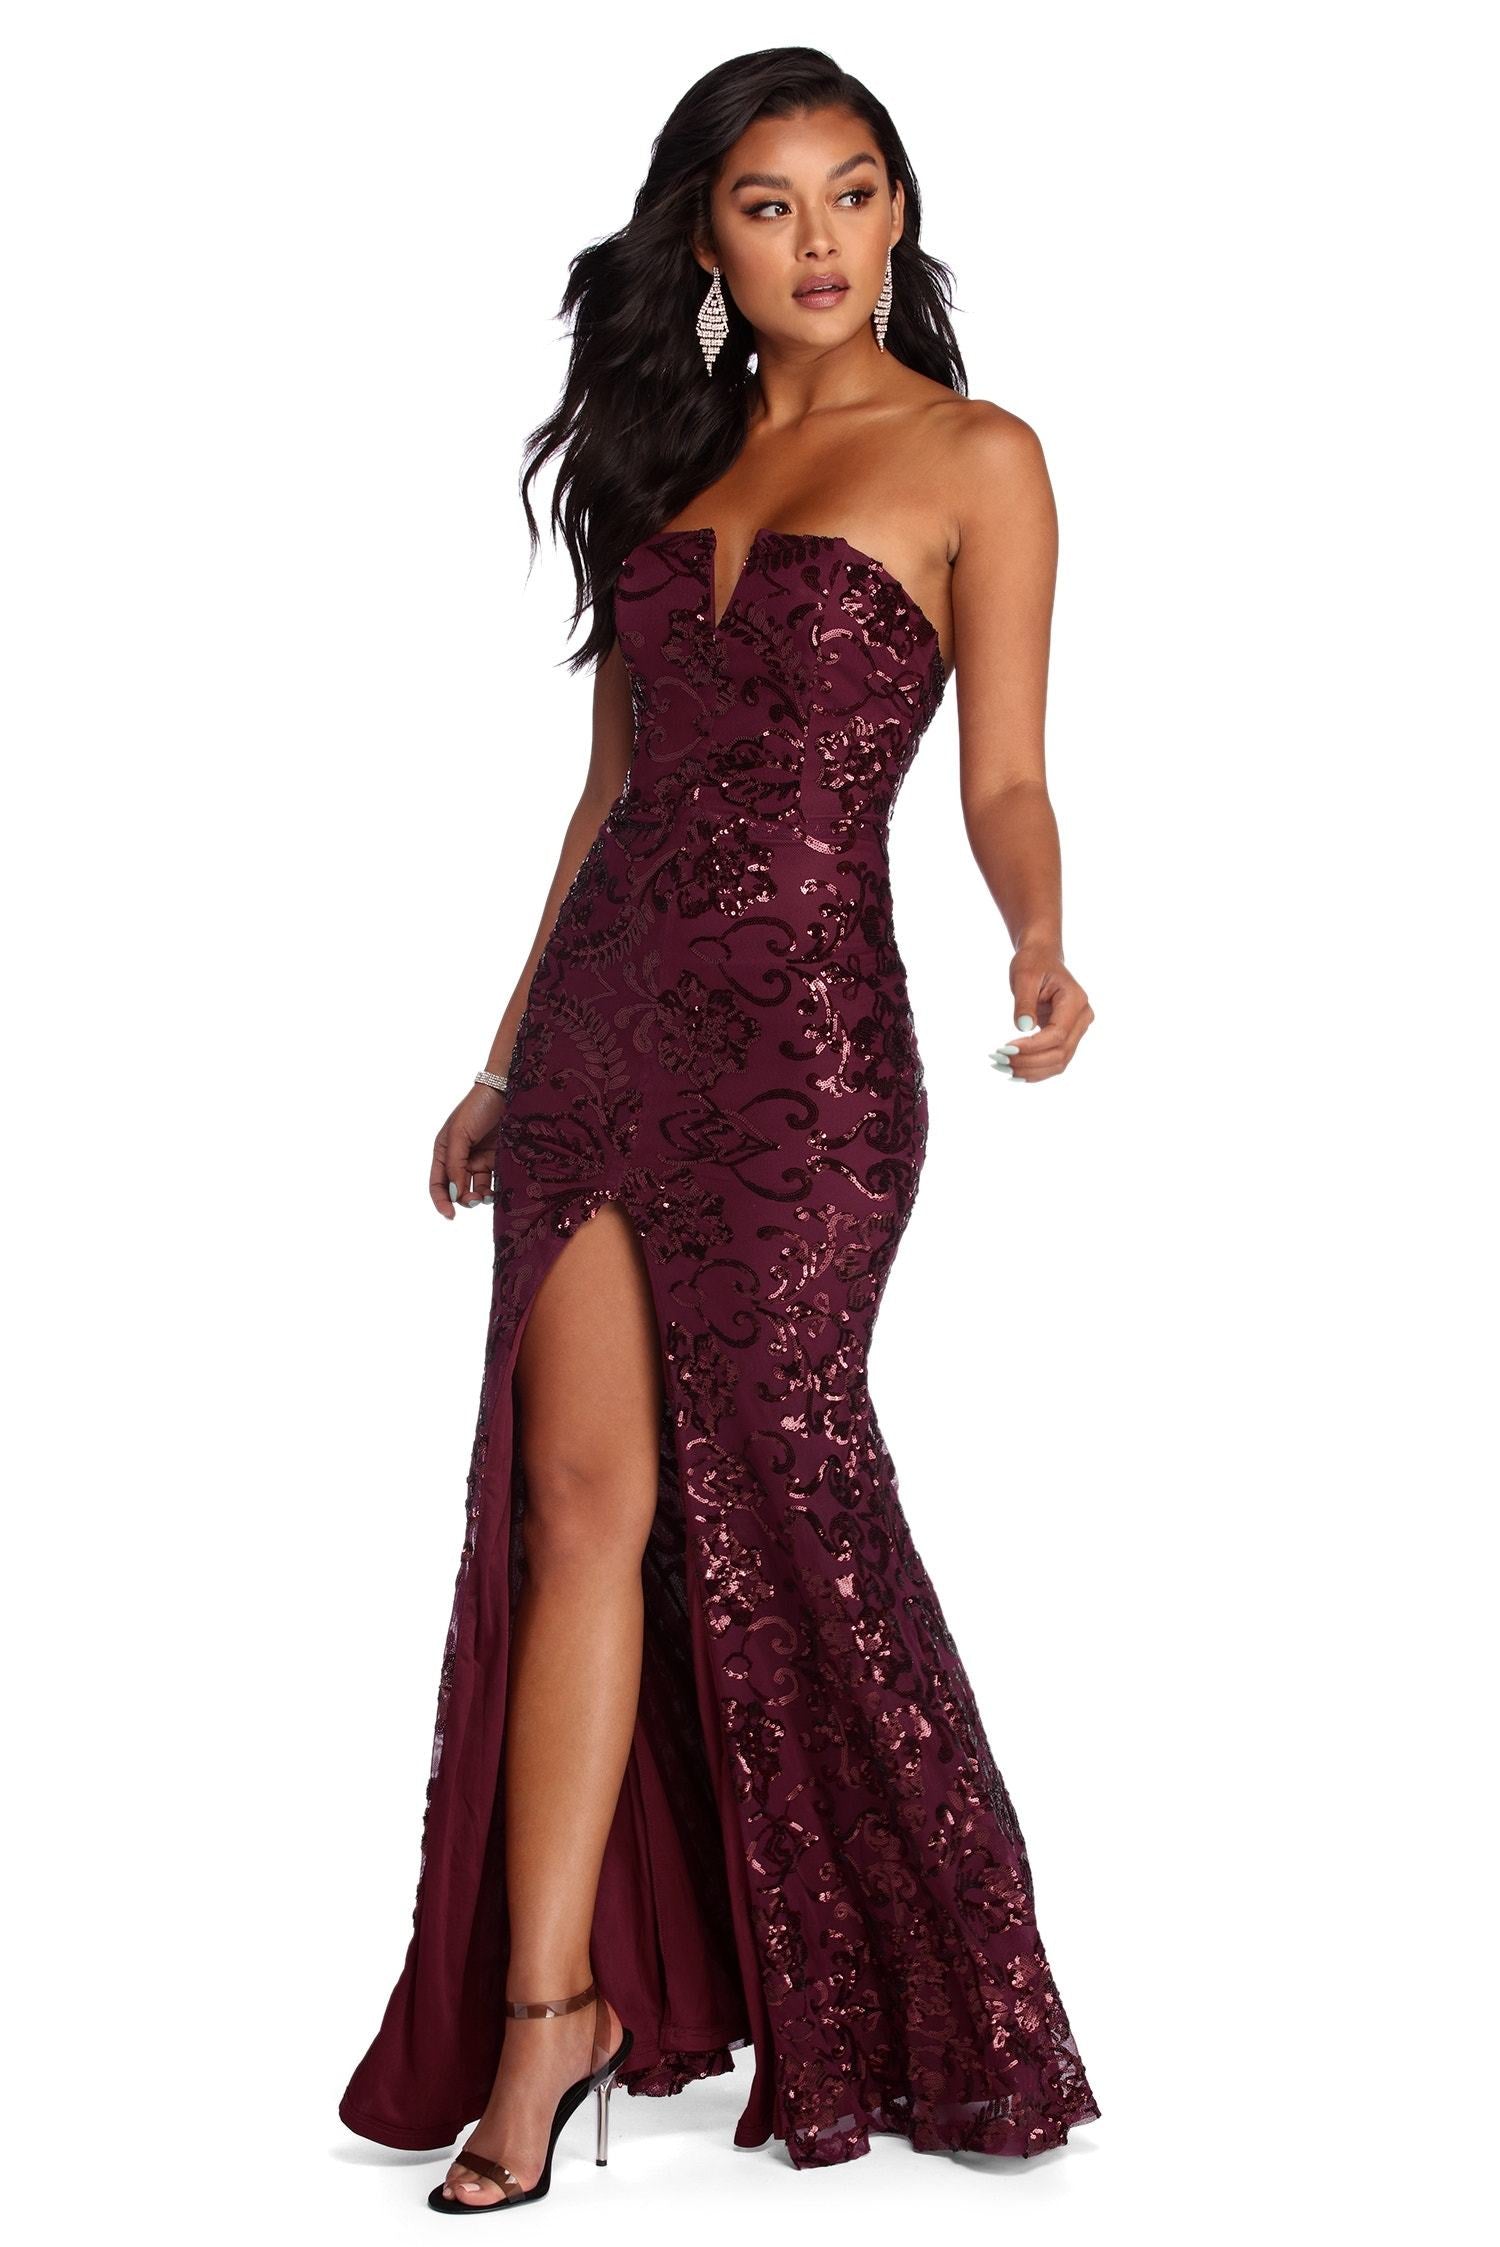 Paulina Formal High Slit Sequin Dress - Lady Occasions